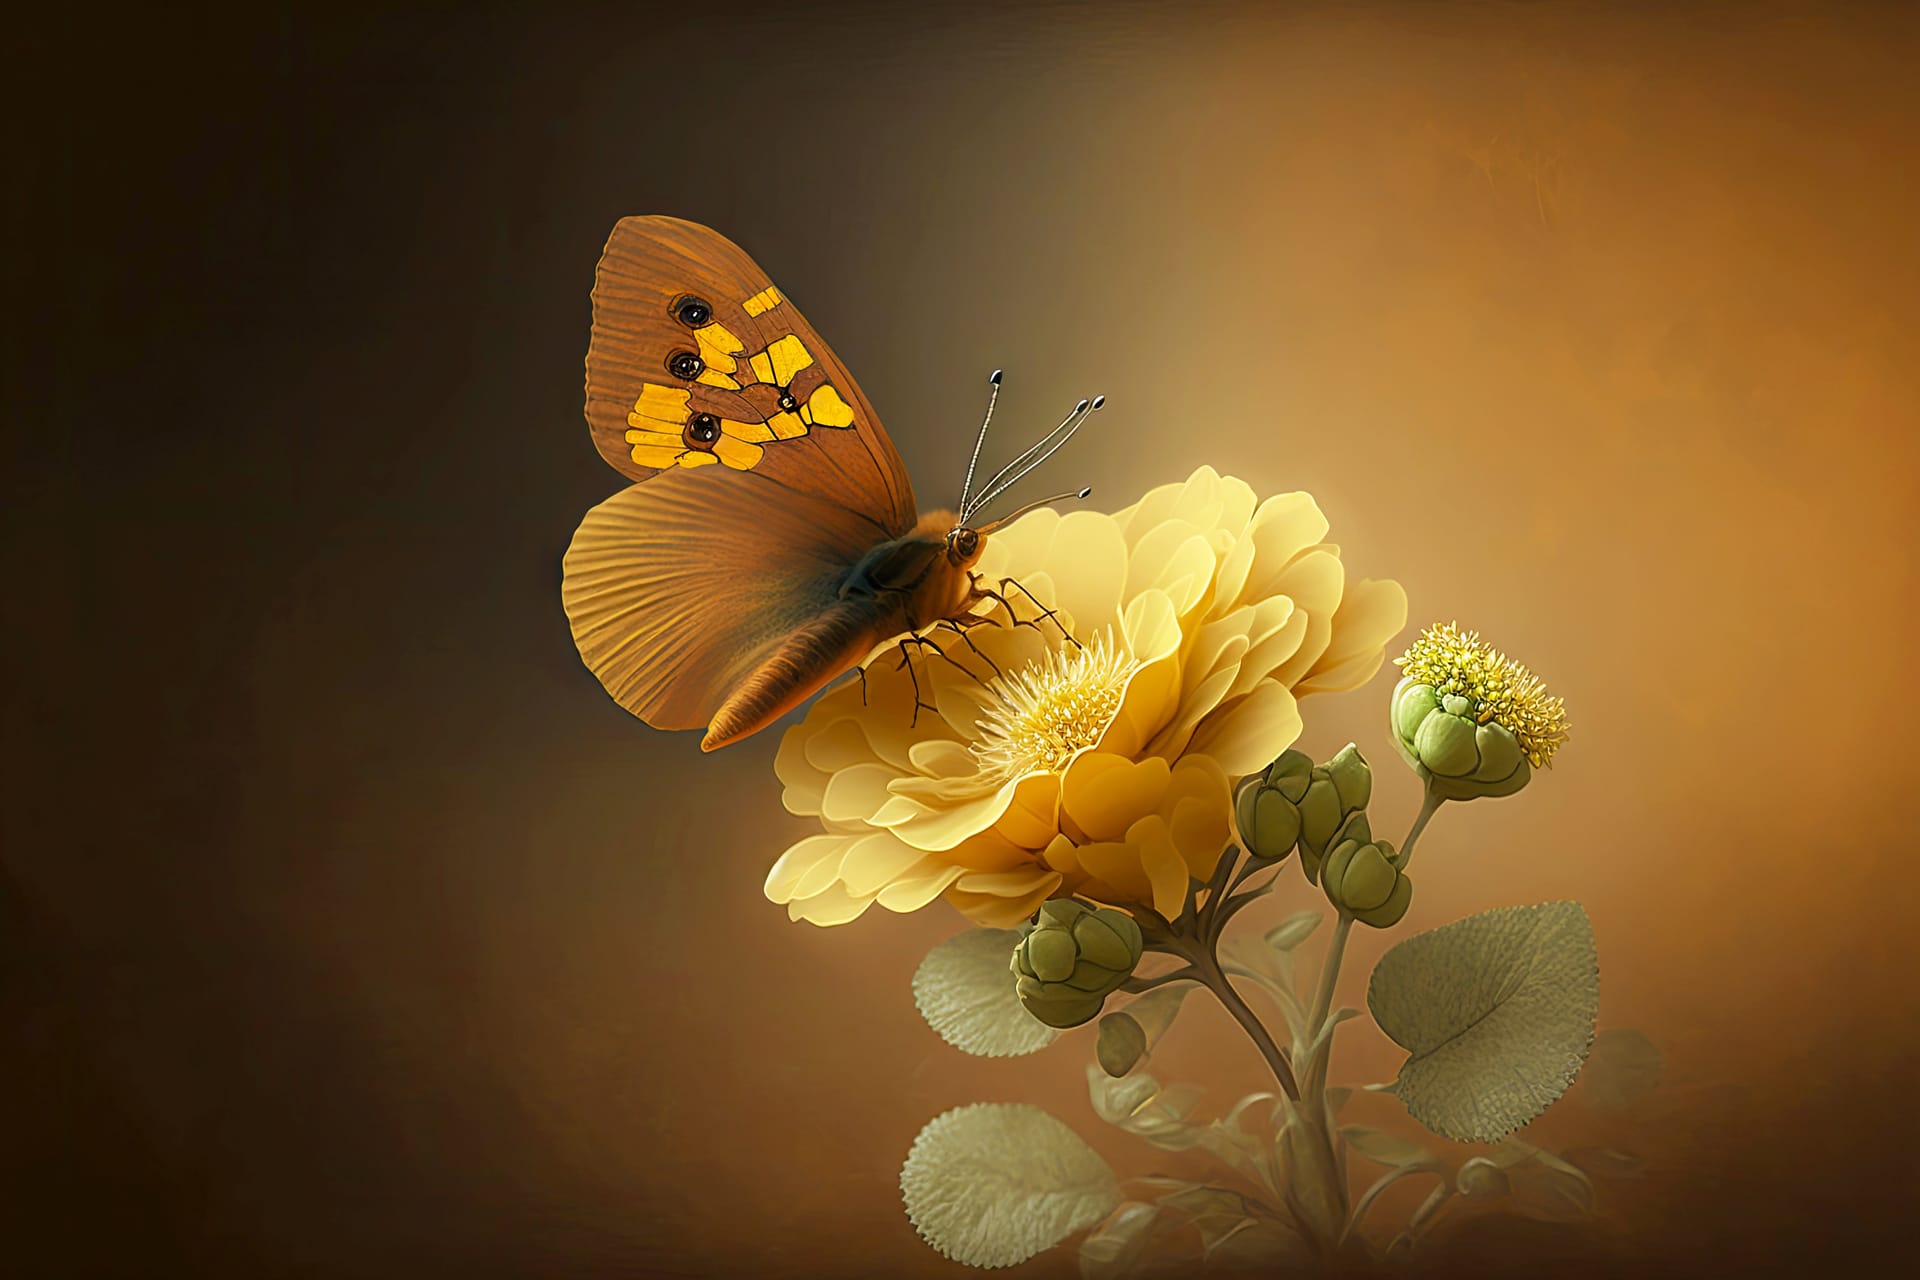 Delicate yellow flower with bud blurred brown background with butterfly